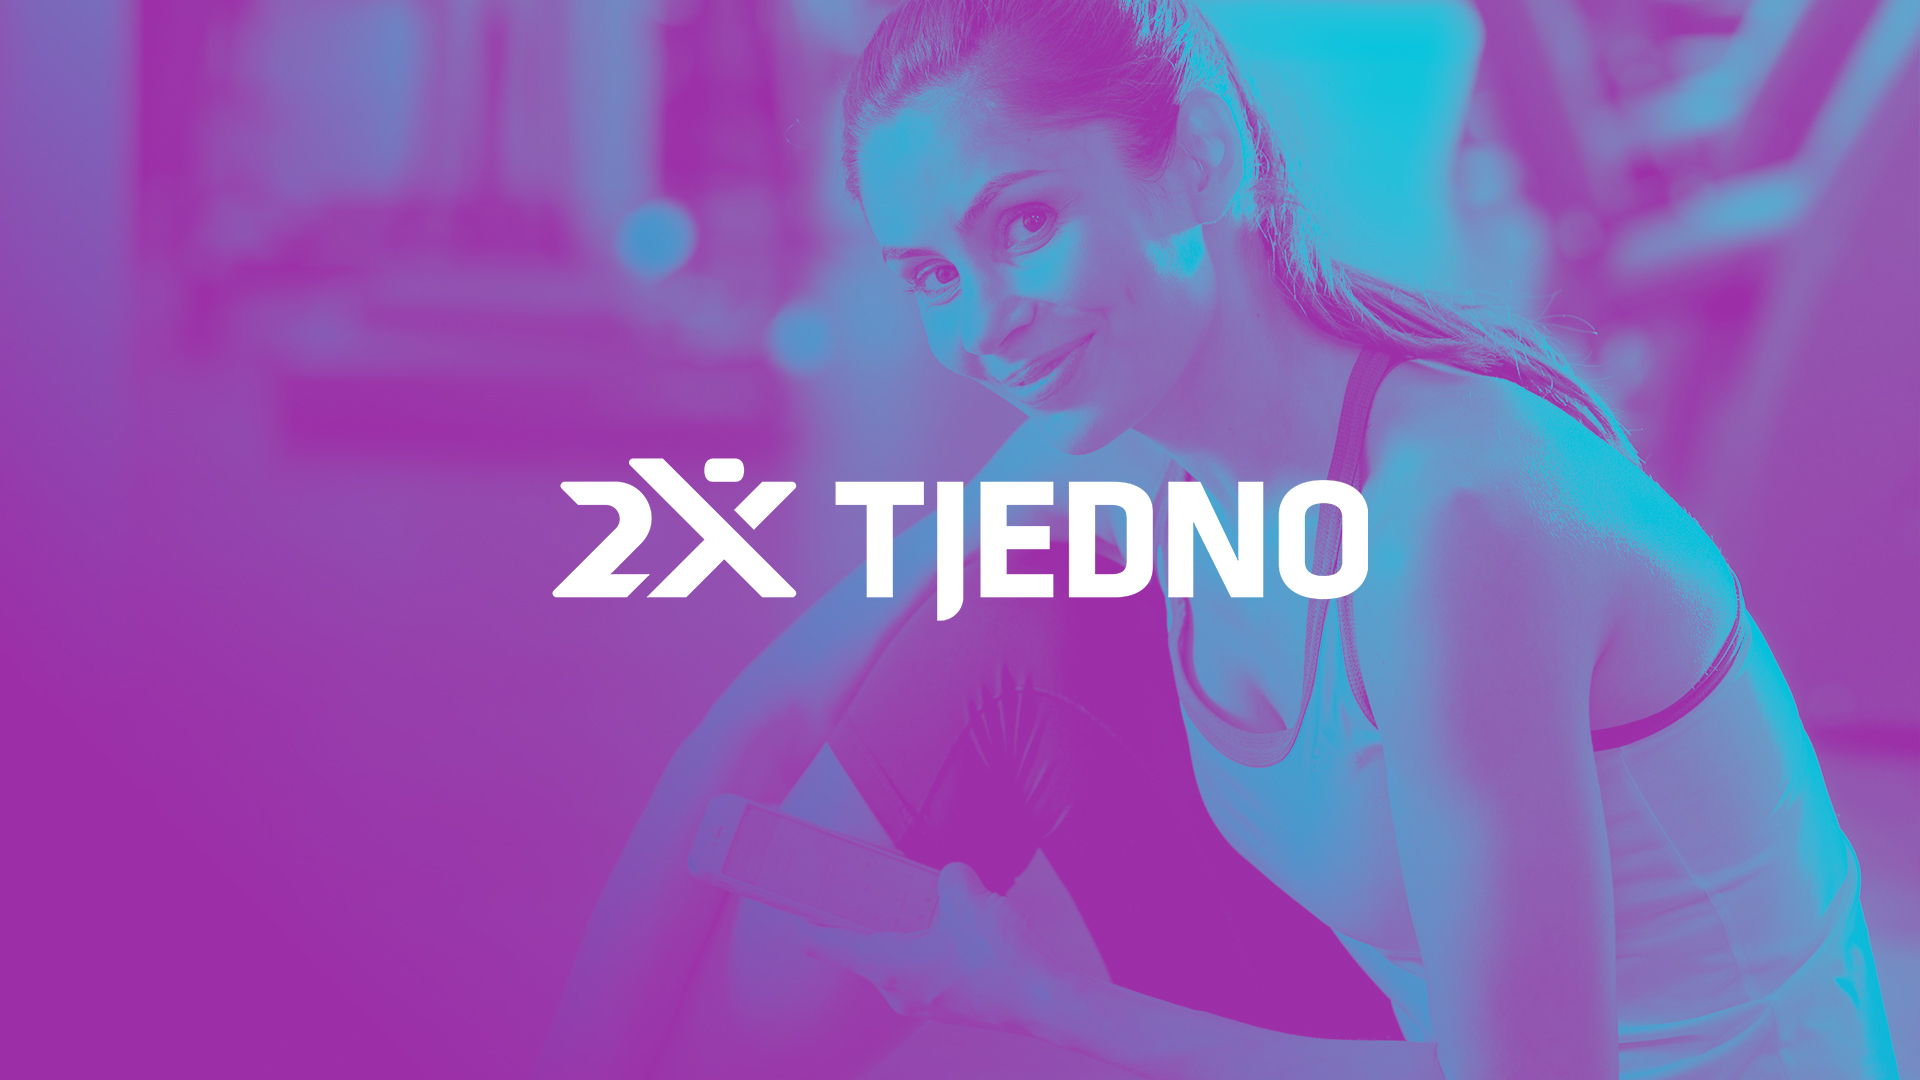 Mirza Selimovic’s Innovative Branding for 2X TJEDNO to Help Revolutionising Women’s Fitness in the Balkan Region